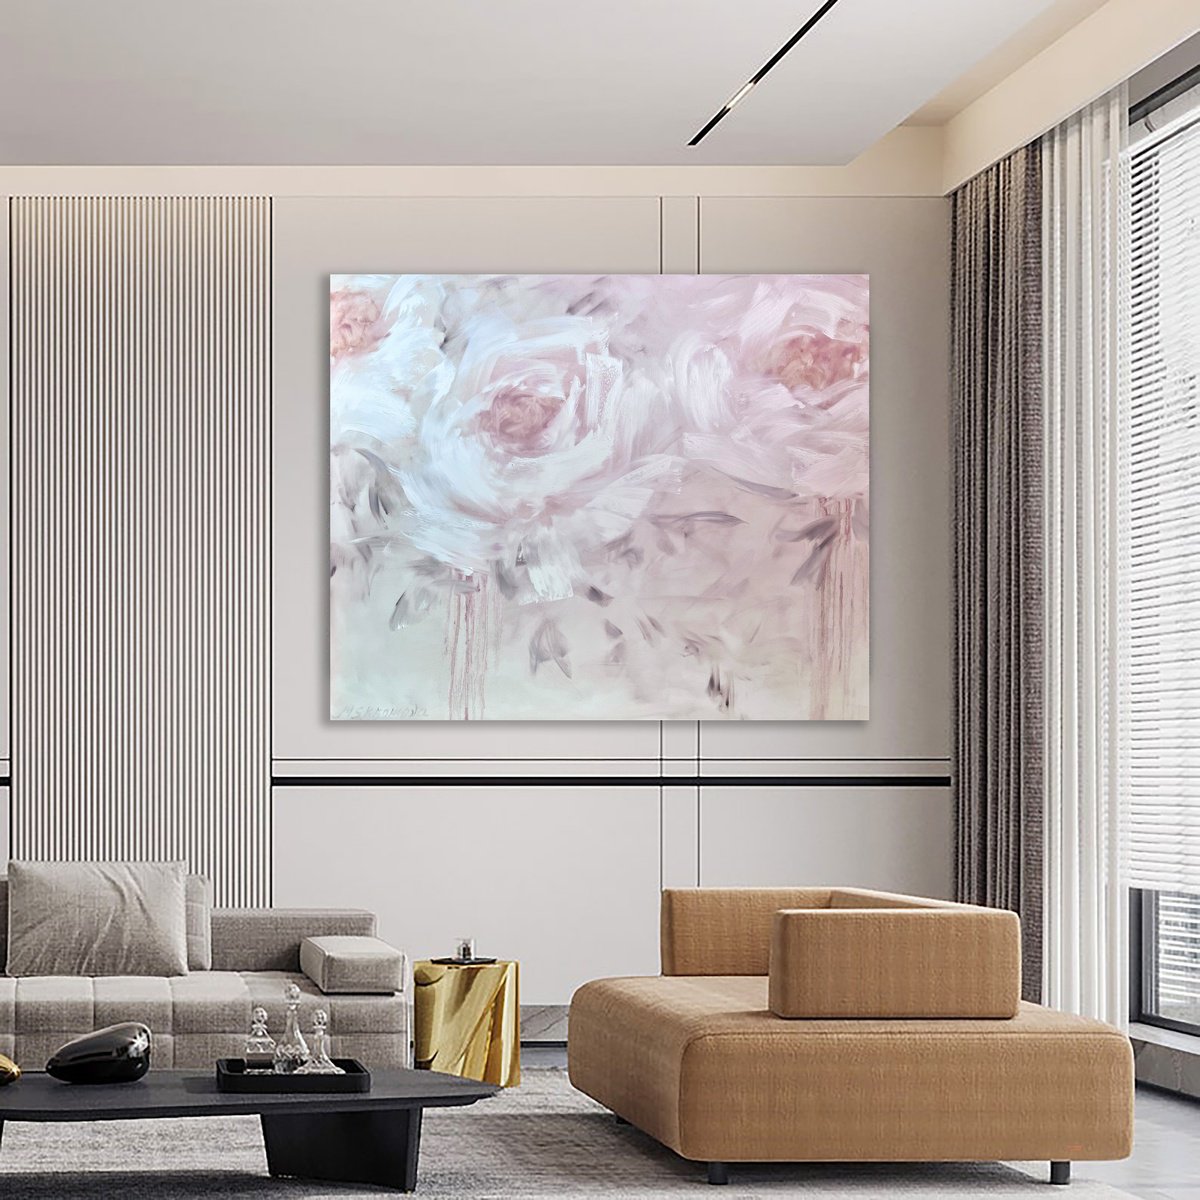 Today Now - XXL Original Painting, flowers large canvas. by Marina Skromova